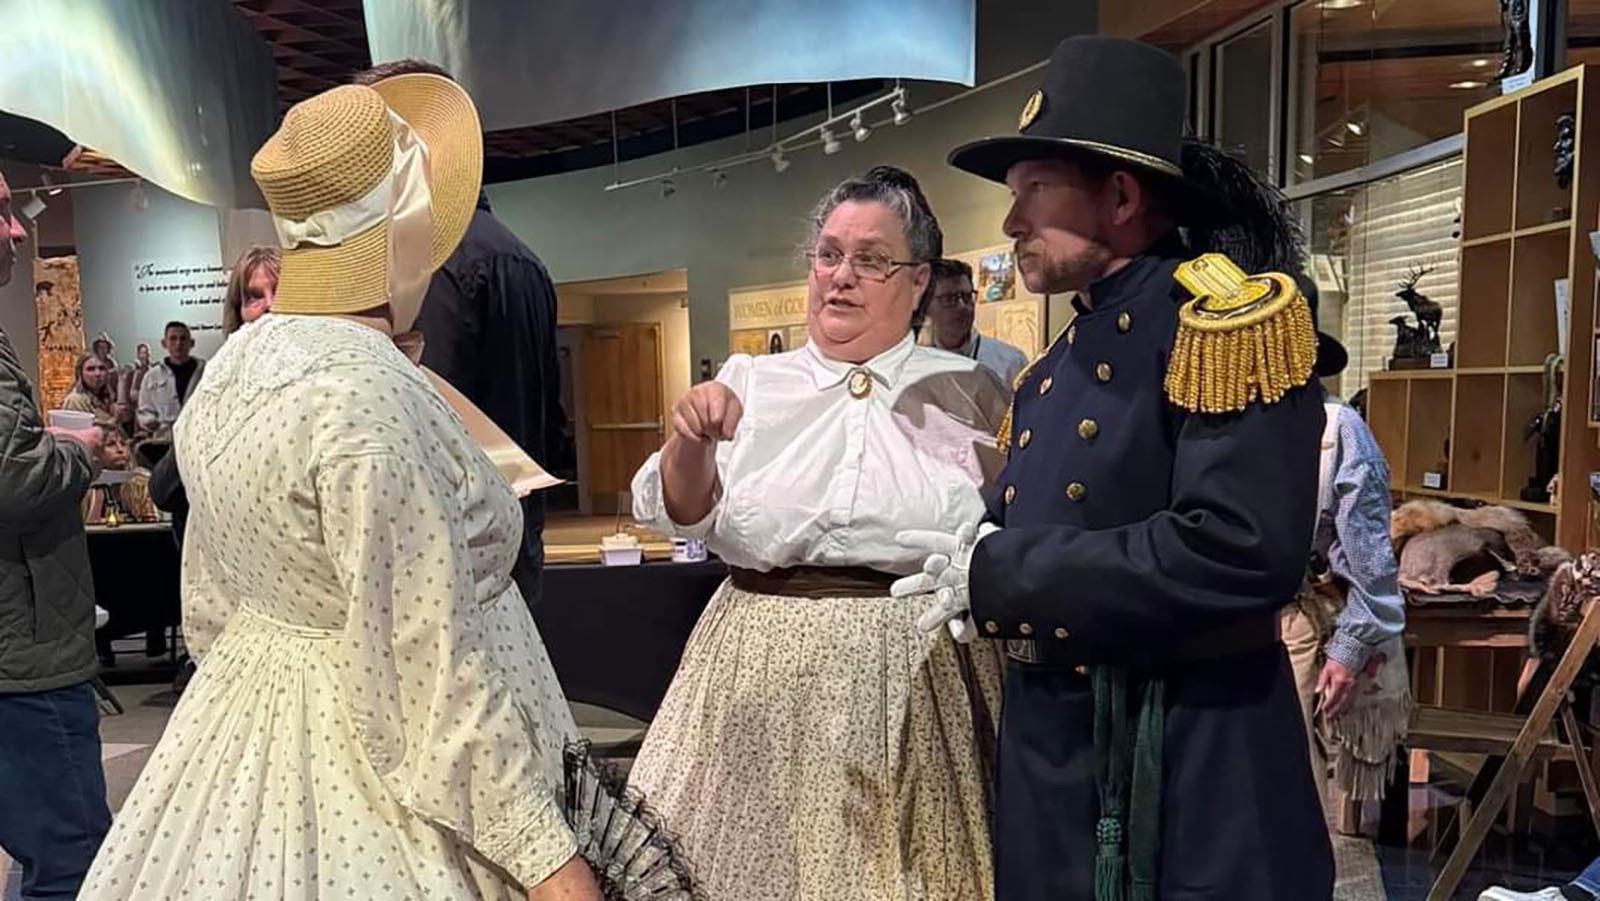 Members of the Platte Bridge Company plan to appear at several events this summer in Wyoming. They are shown here at the National Historic Trails Interpretive Center in Casper.